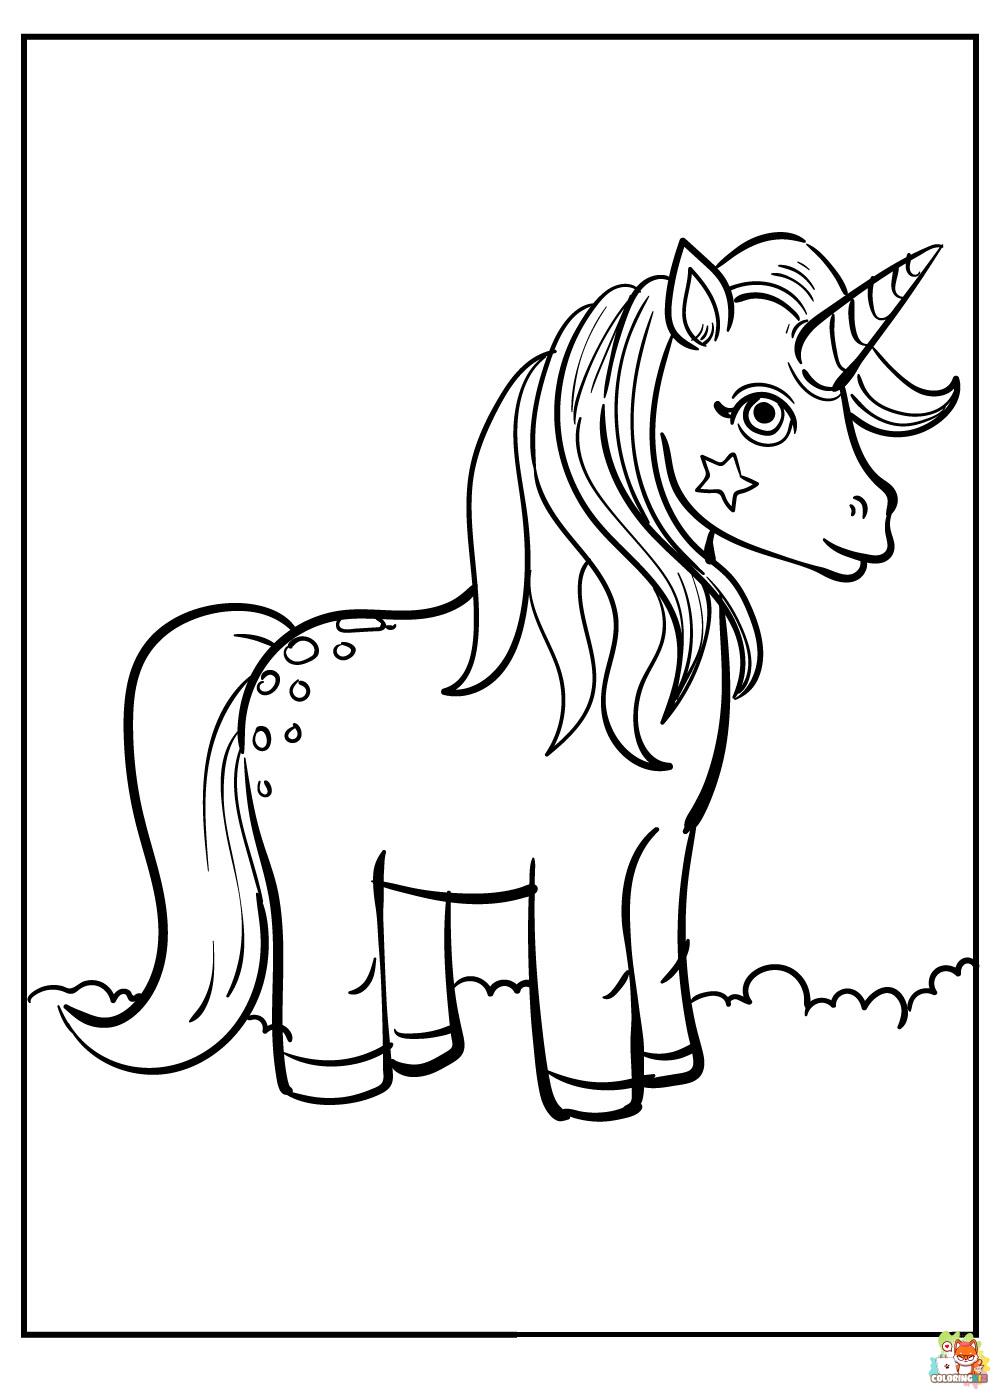 The Last Unicorn Coloring Pages 11